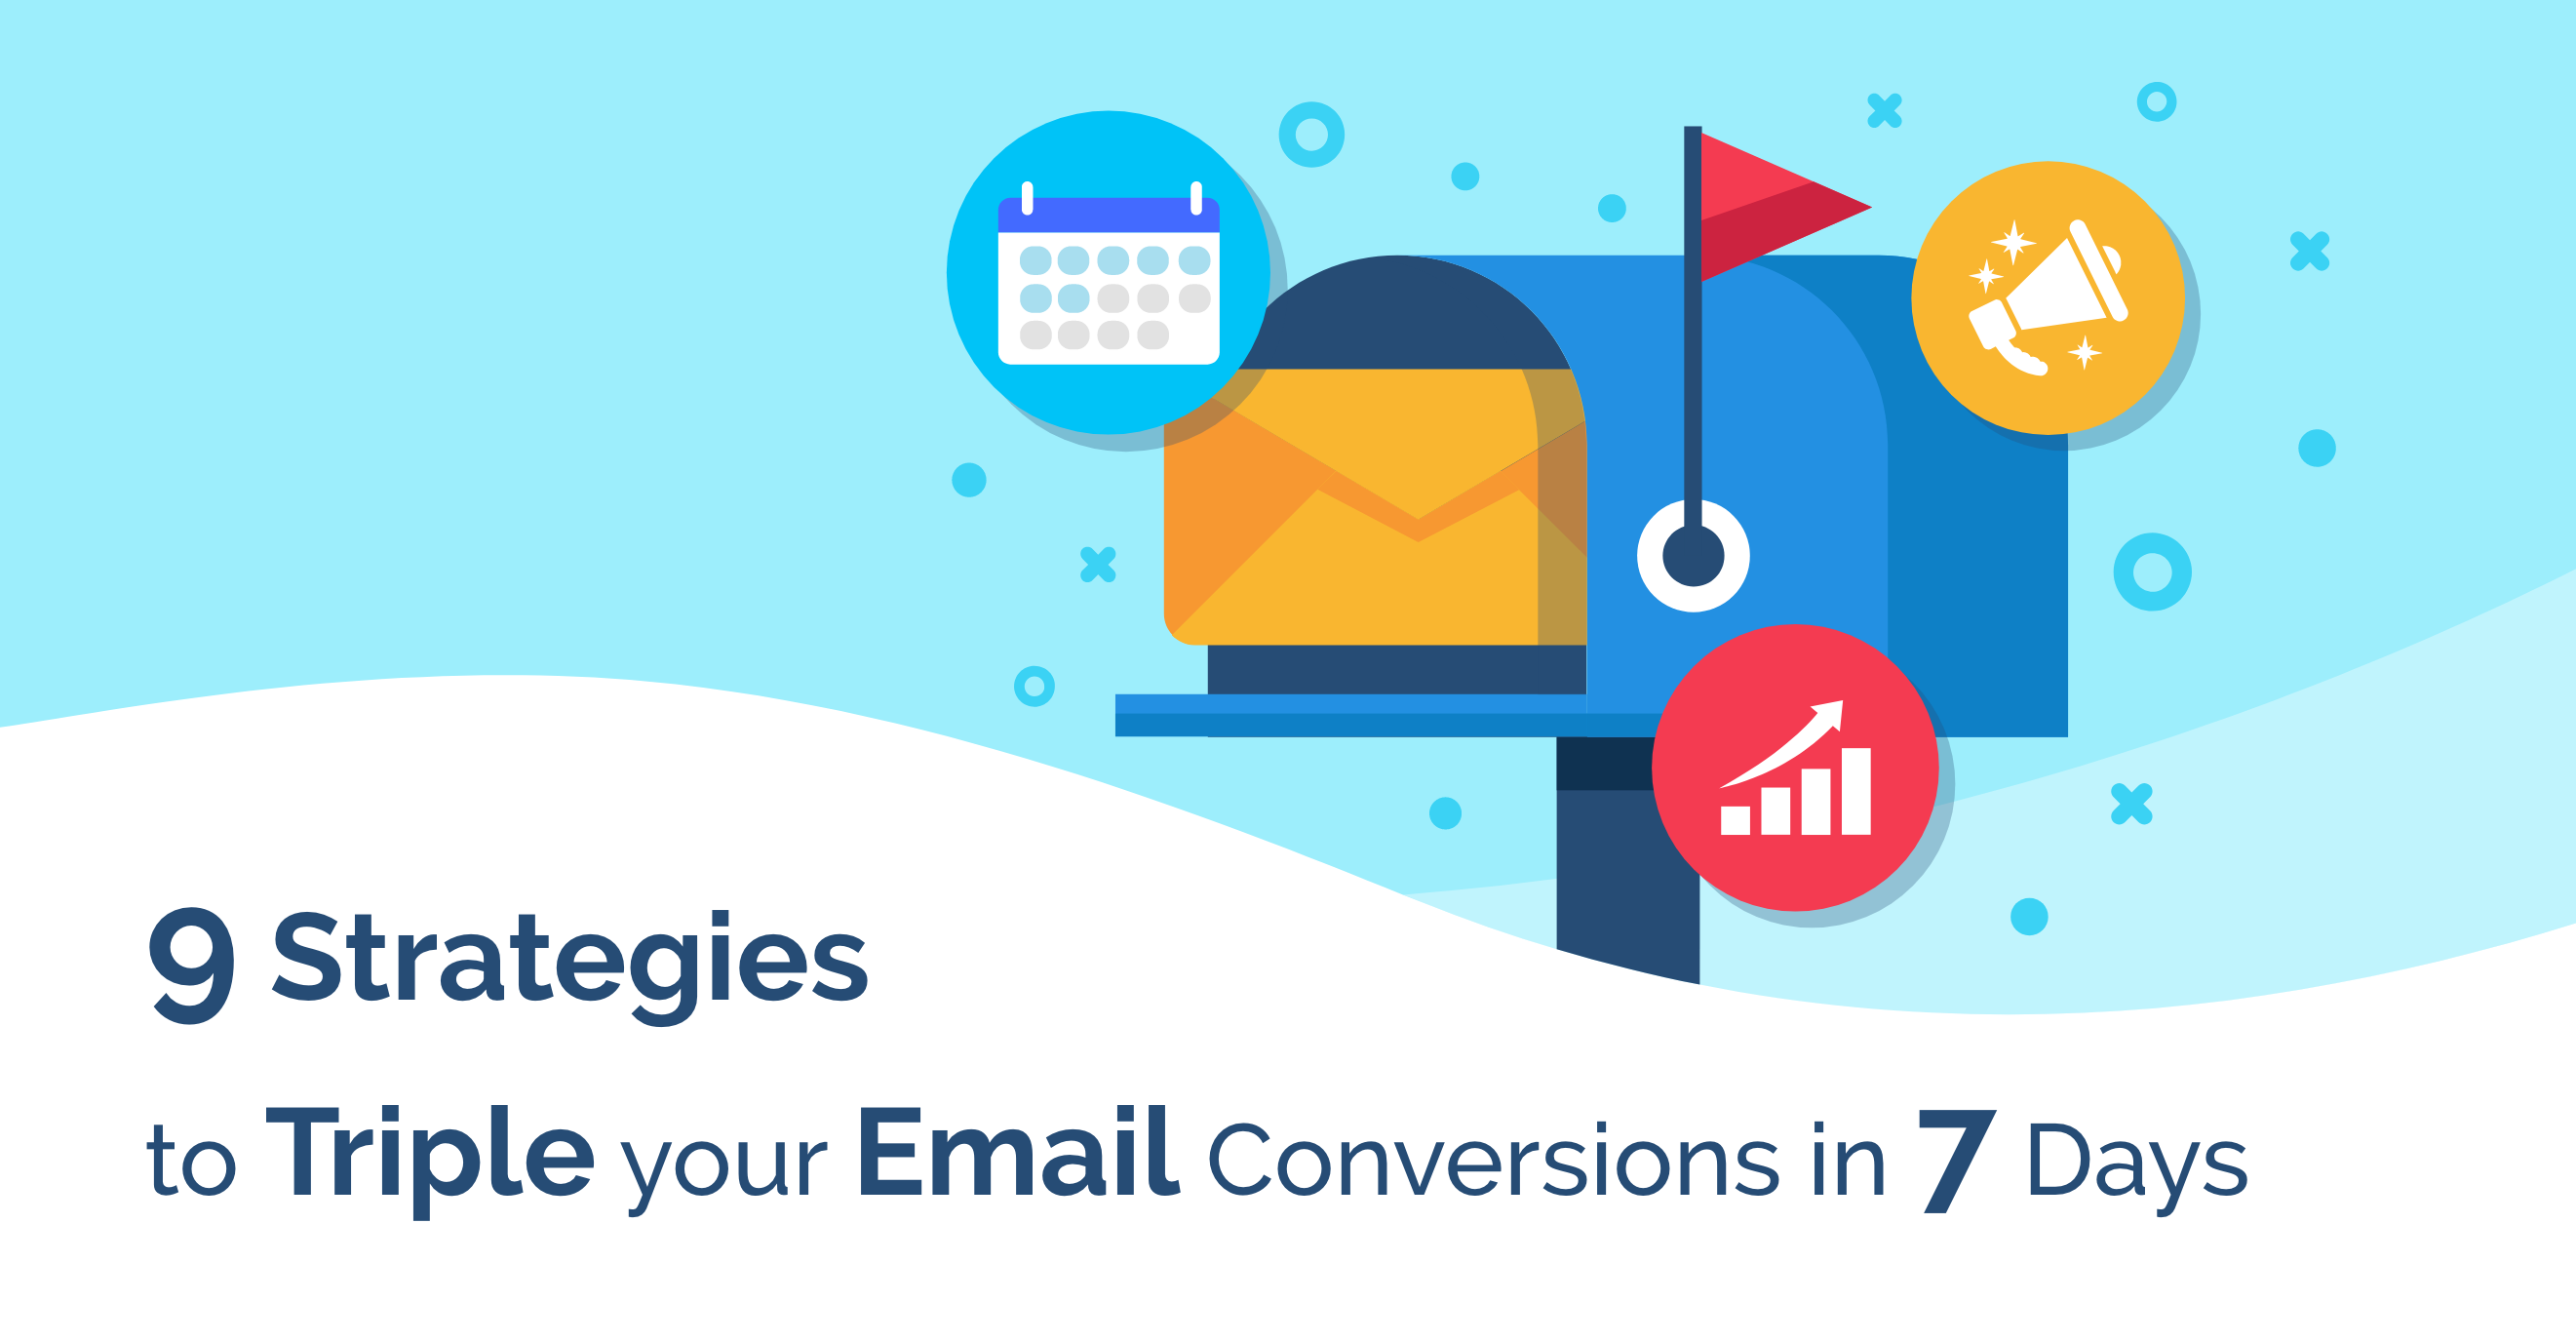 9 Strategies to Triple your Email Conversions in 7 Days